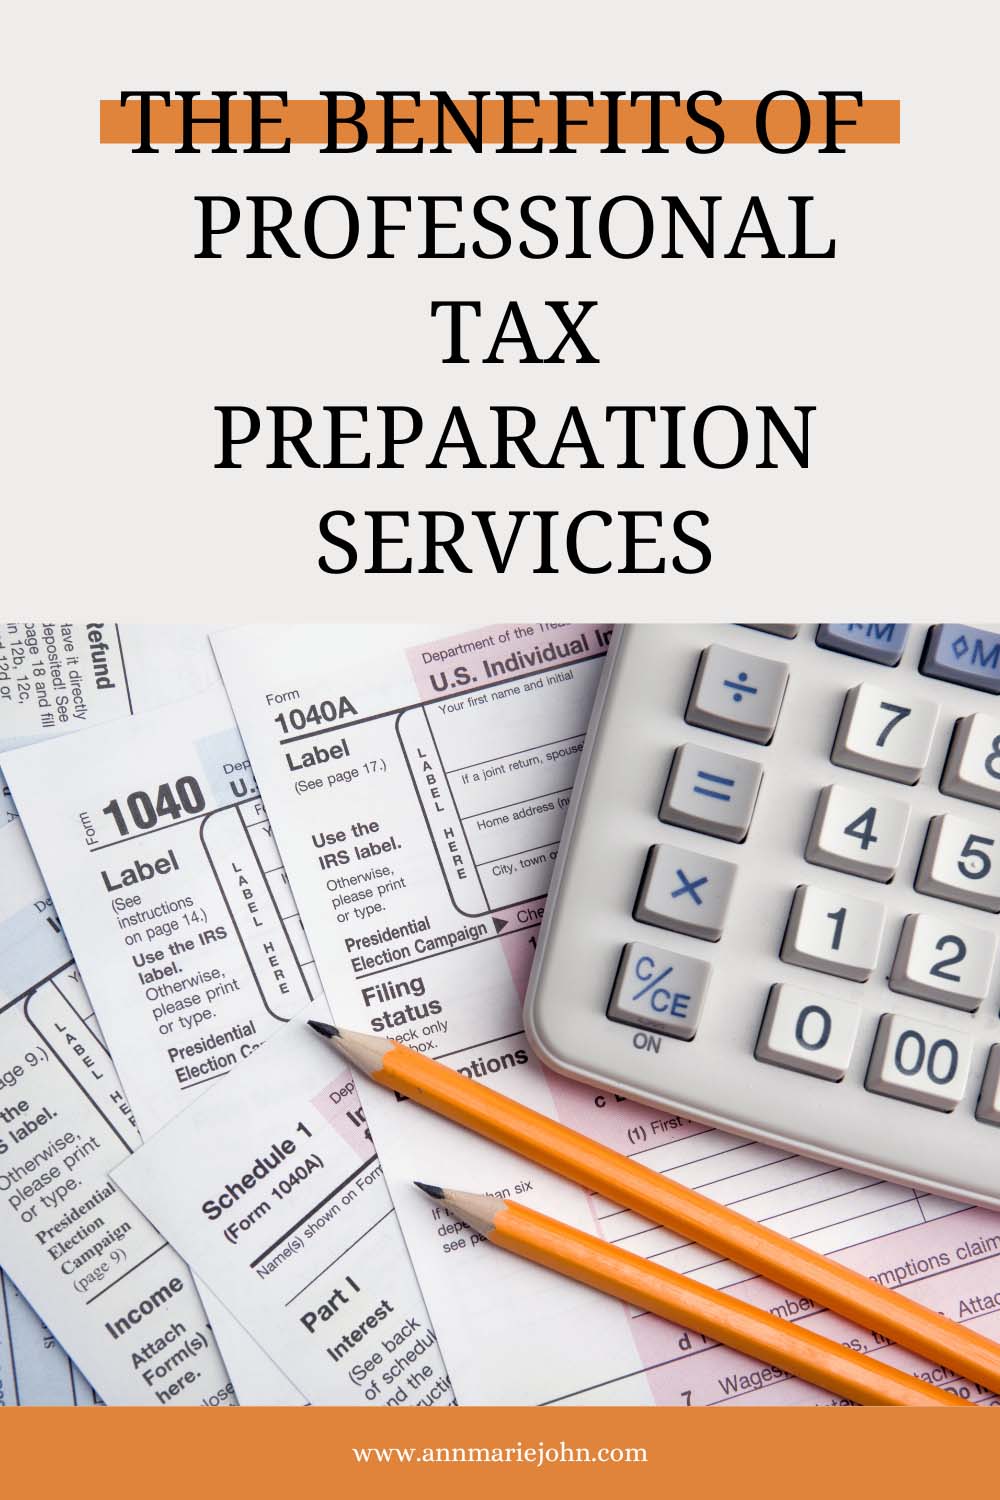 The Benefits of Professional Tax Preparation Services